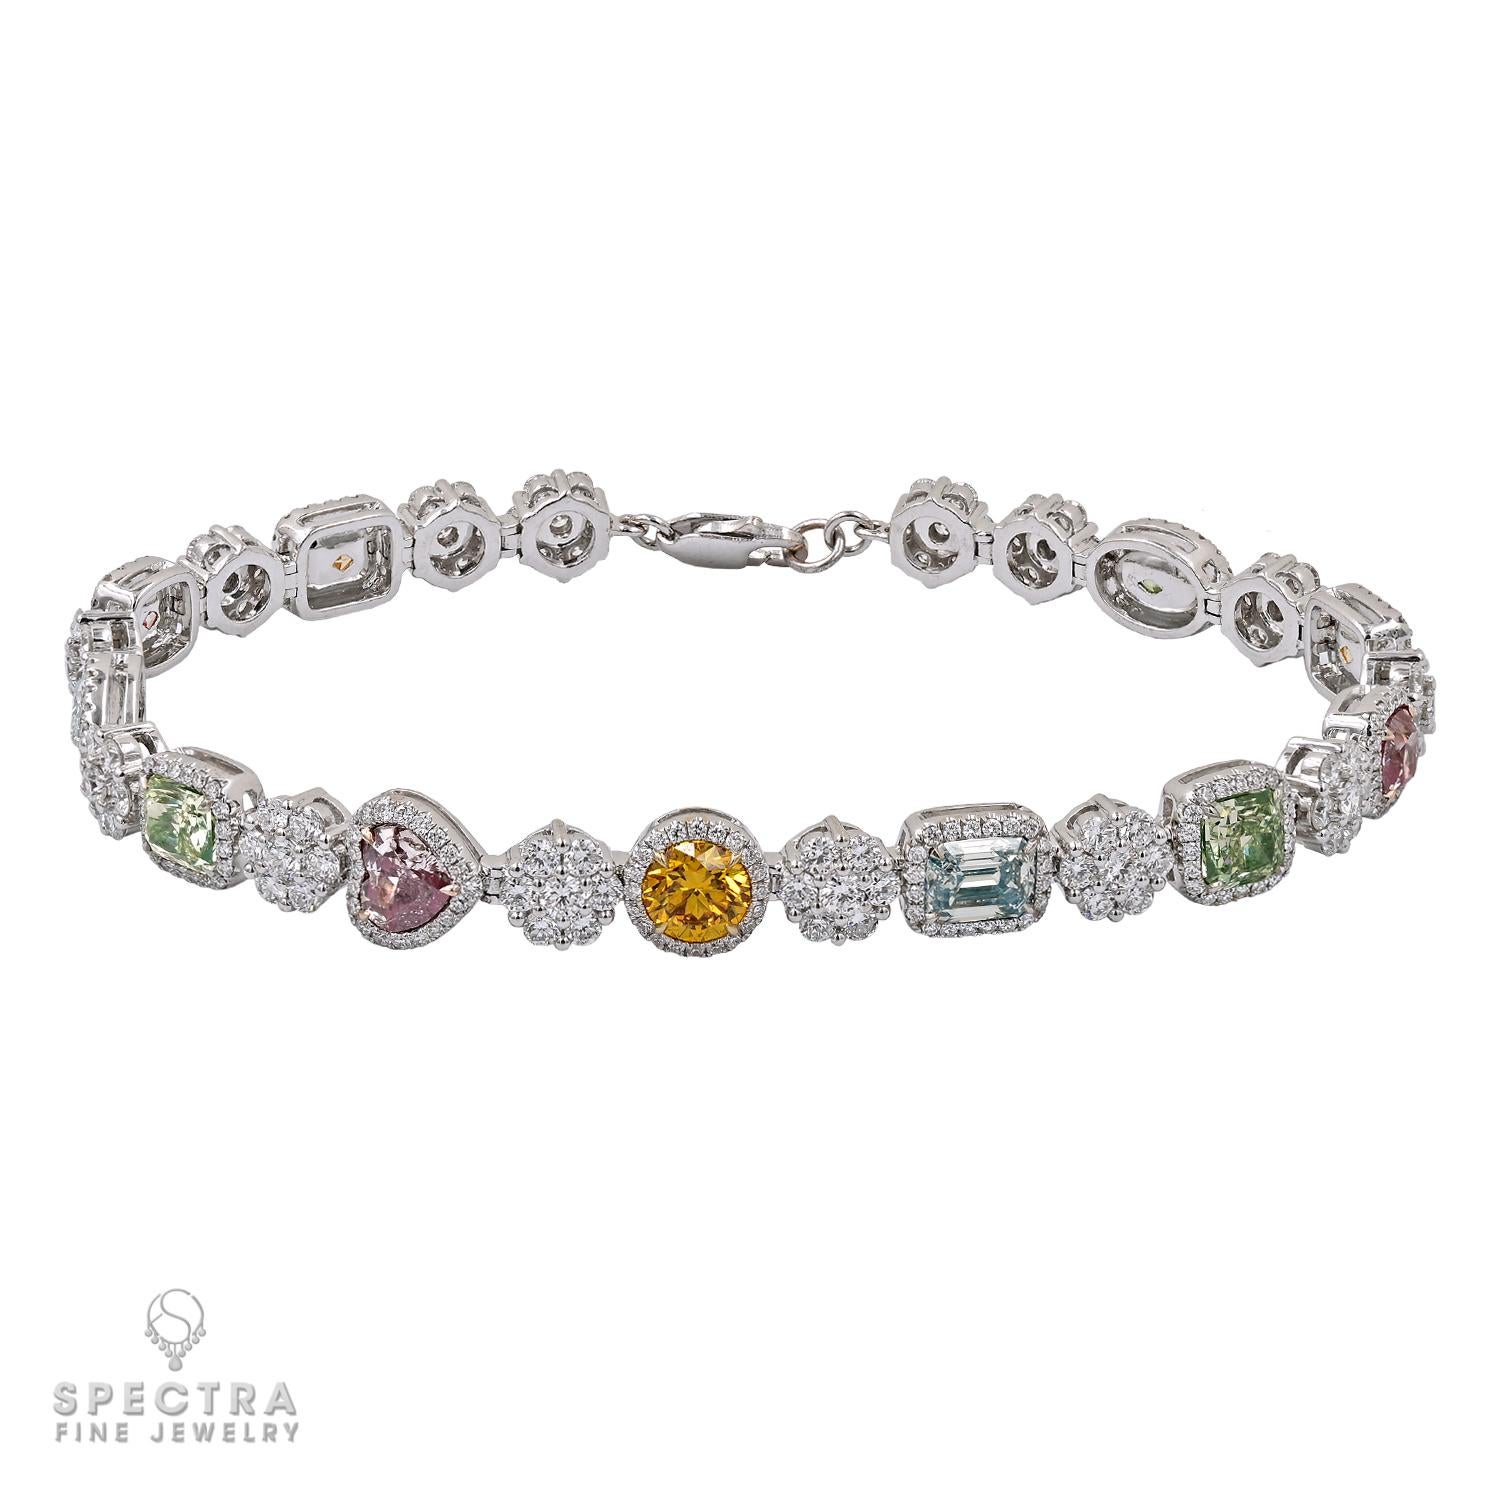 This lovely bracelet is adorned with a stunning array of gemstones, featuring 11 intricately arranged colored mix-shape diamonds, collectively weighing 5.85 carats. Each diamond is carefully selected, showcasing a brilliant fusion of shapes that add